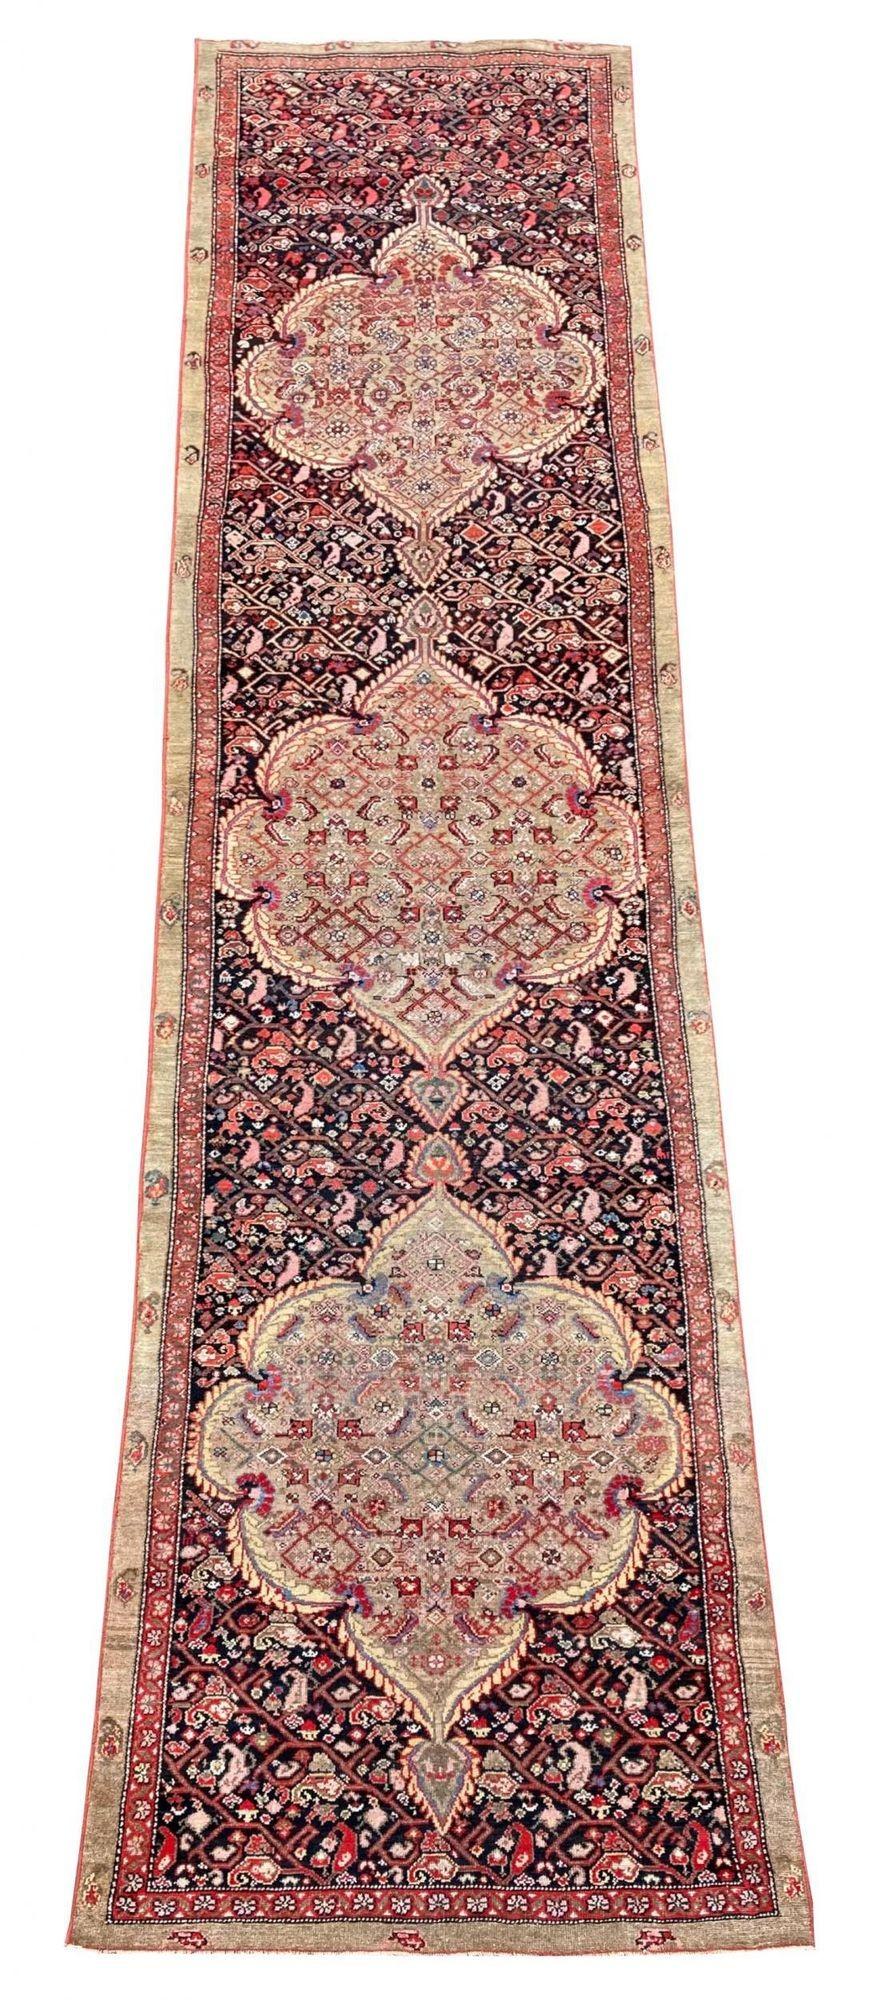 An outstanding antique Malayer runner, handwoven circa 1900. The design features three large pistachio green Herati medallions on a deep indigo field of linked Botehs. Lovely wool quality and great secondary colours.

Size: 4.25m x 0.96m (13ft 11in